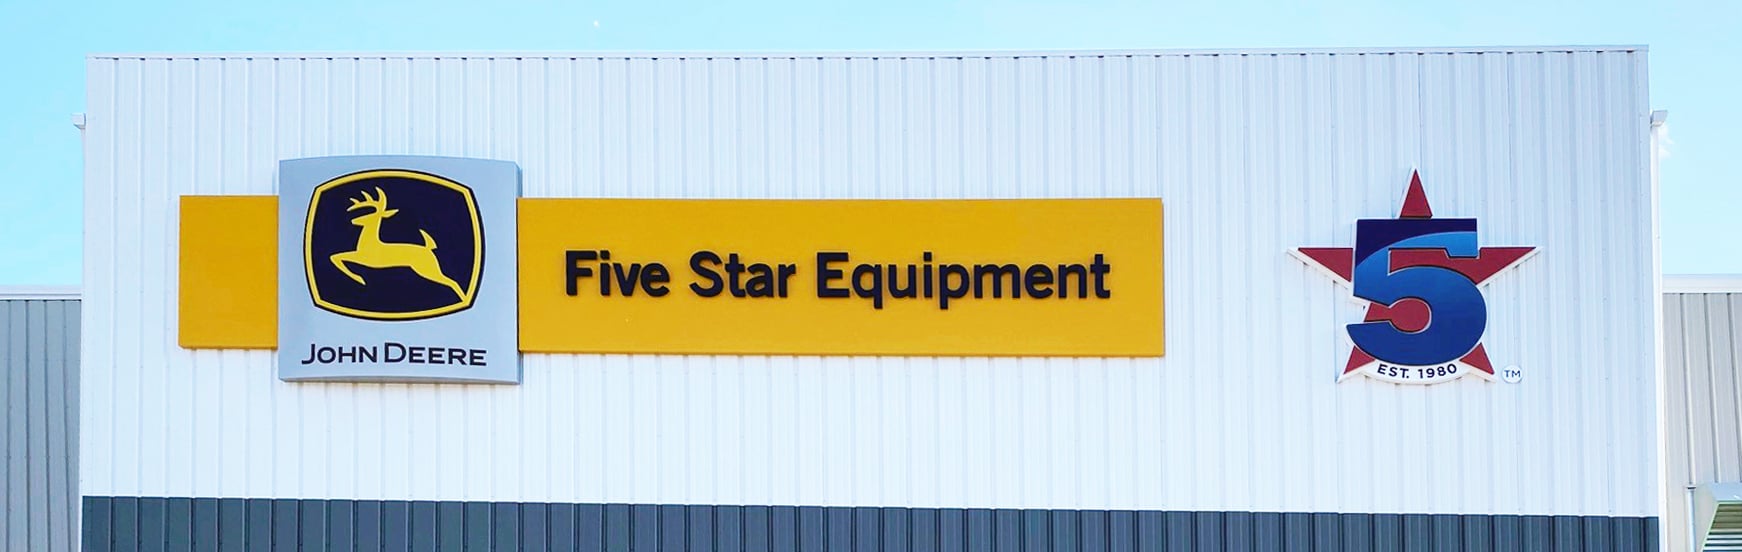 Five Star Equipment - Building Sign Panorama